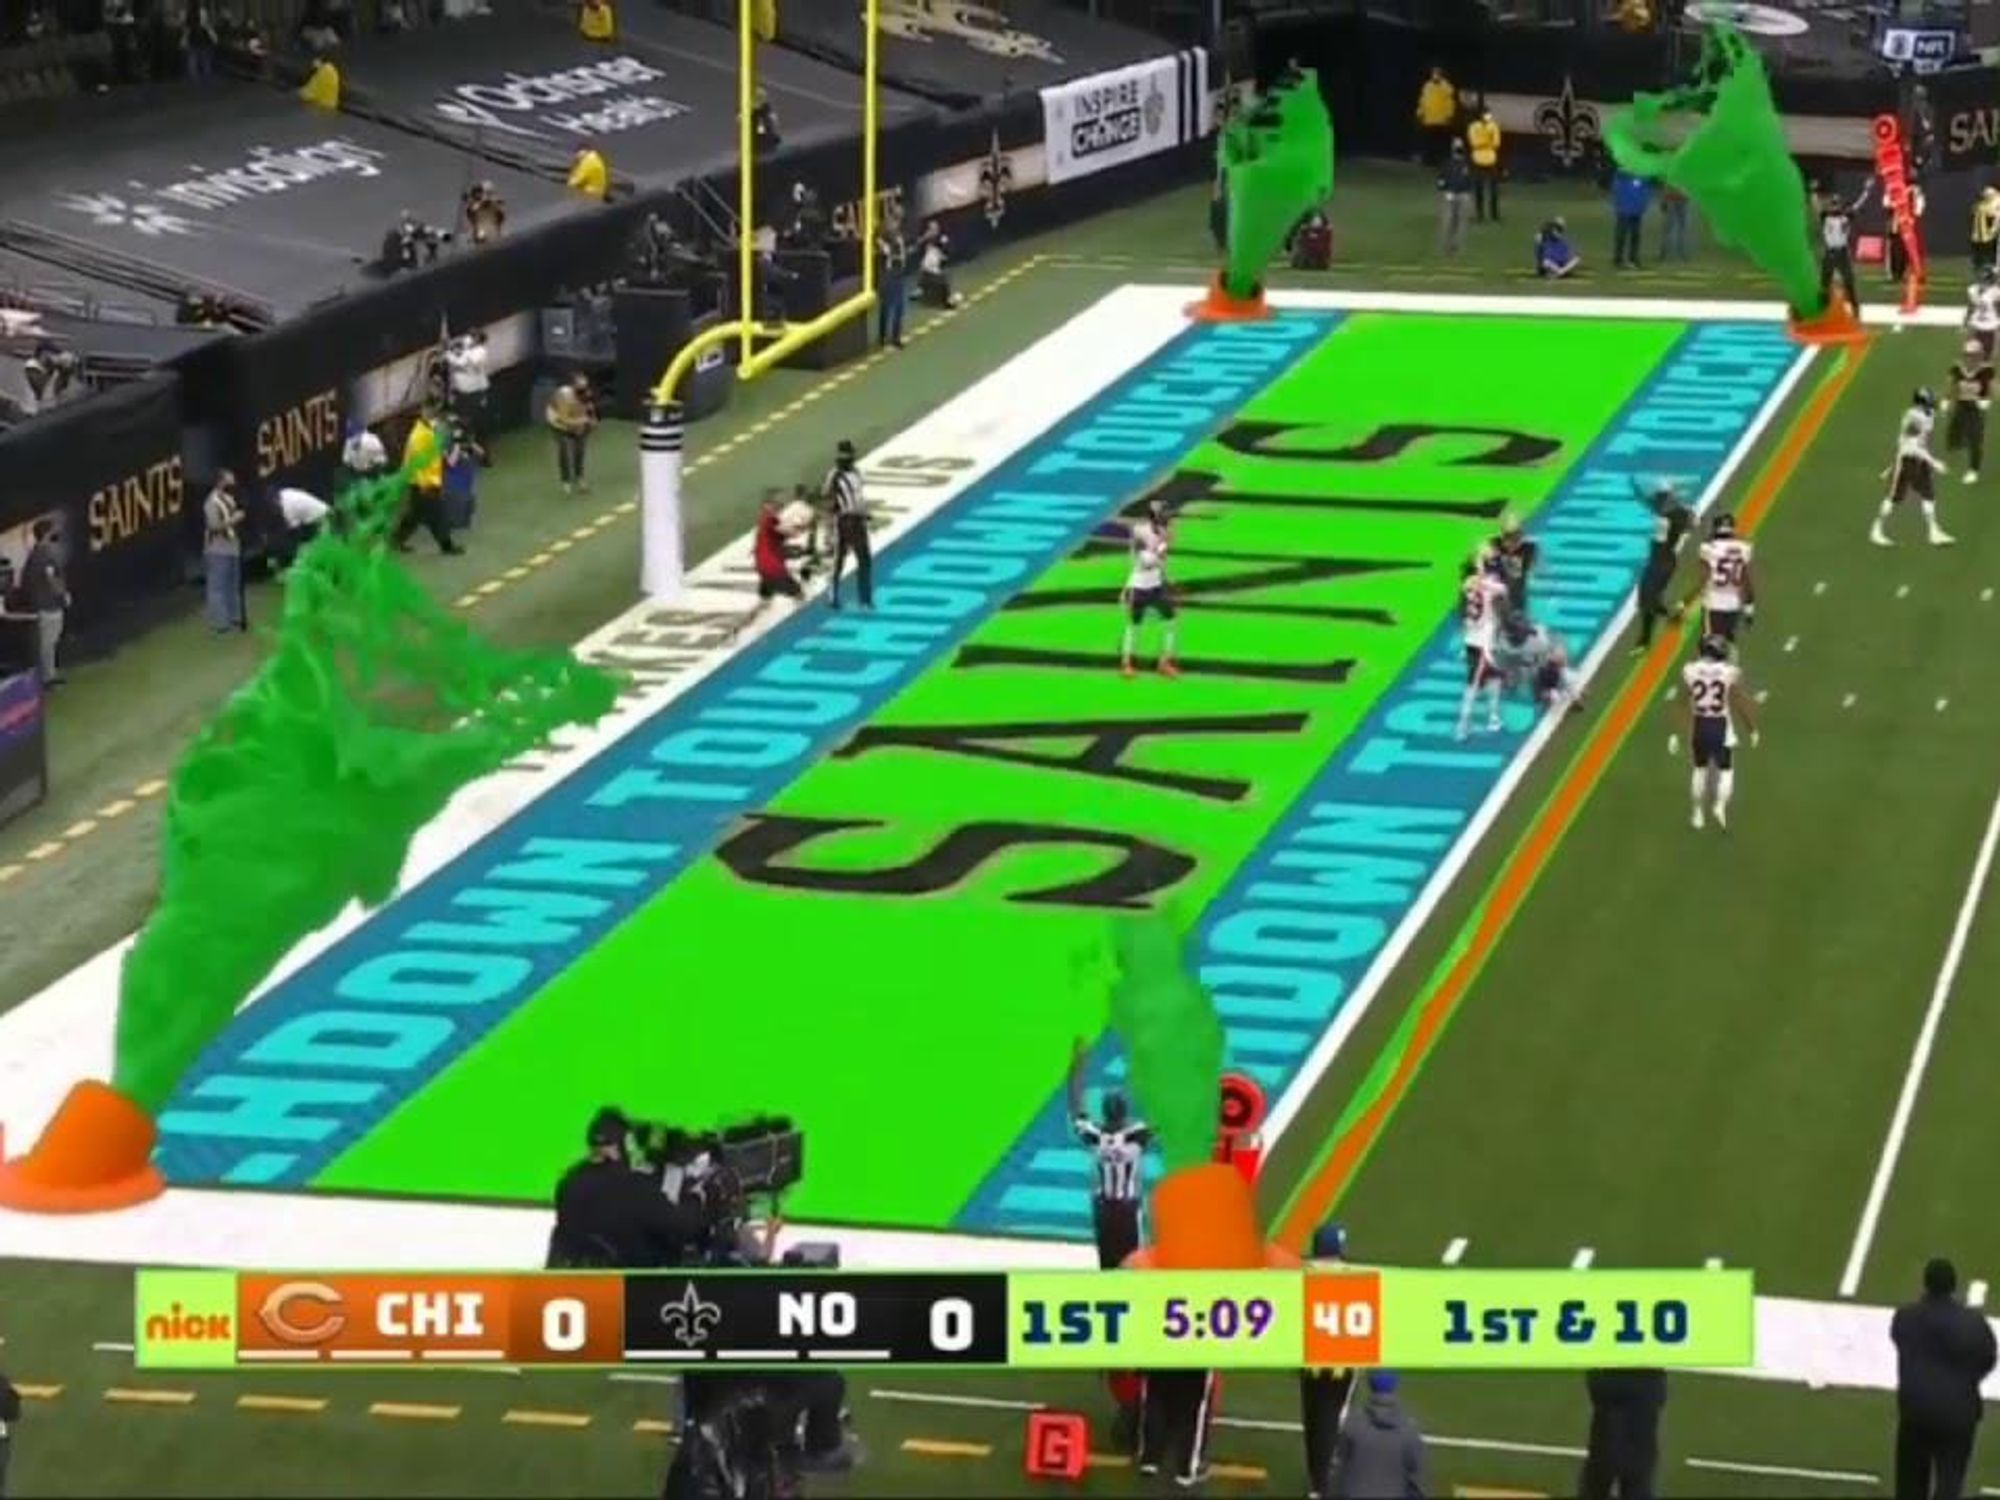 Nickelodeon's takeover of NFL game was all kinds of slime-covered